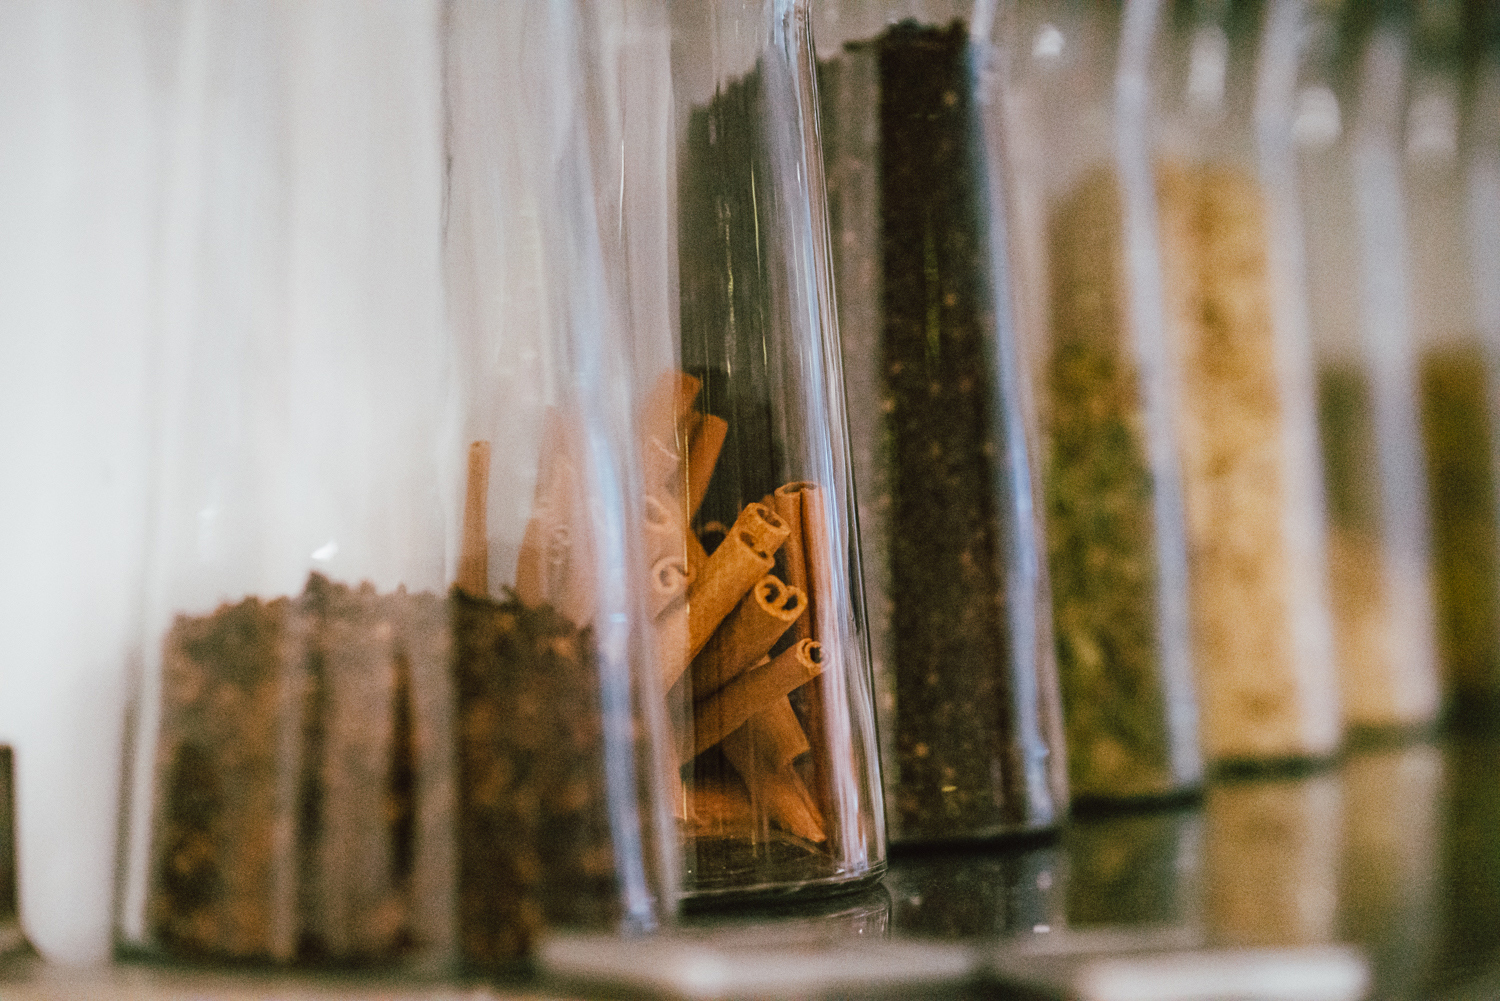 A row of glass containers hold a variety of spices at Botte Chai Bar in Saskatoon Saskatchewan.